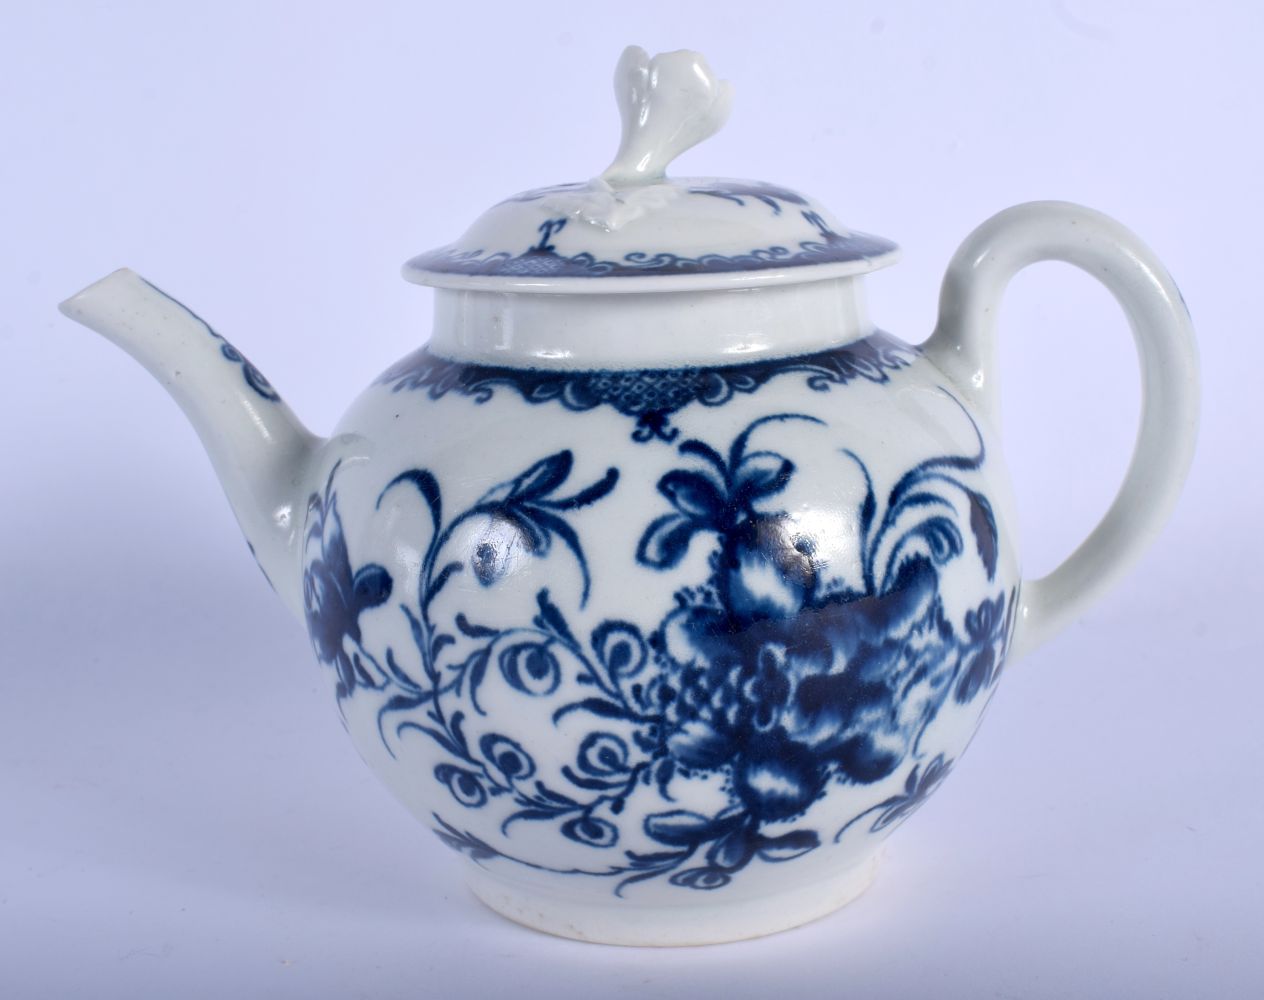 18th c. Worcester teapot and cover painted with the Mansfield pattern. 16.5cm long and 12.5cm high